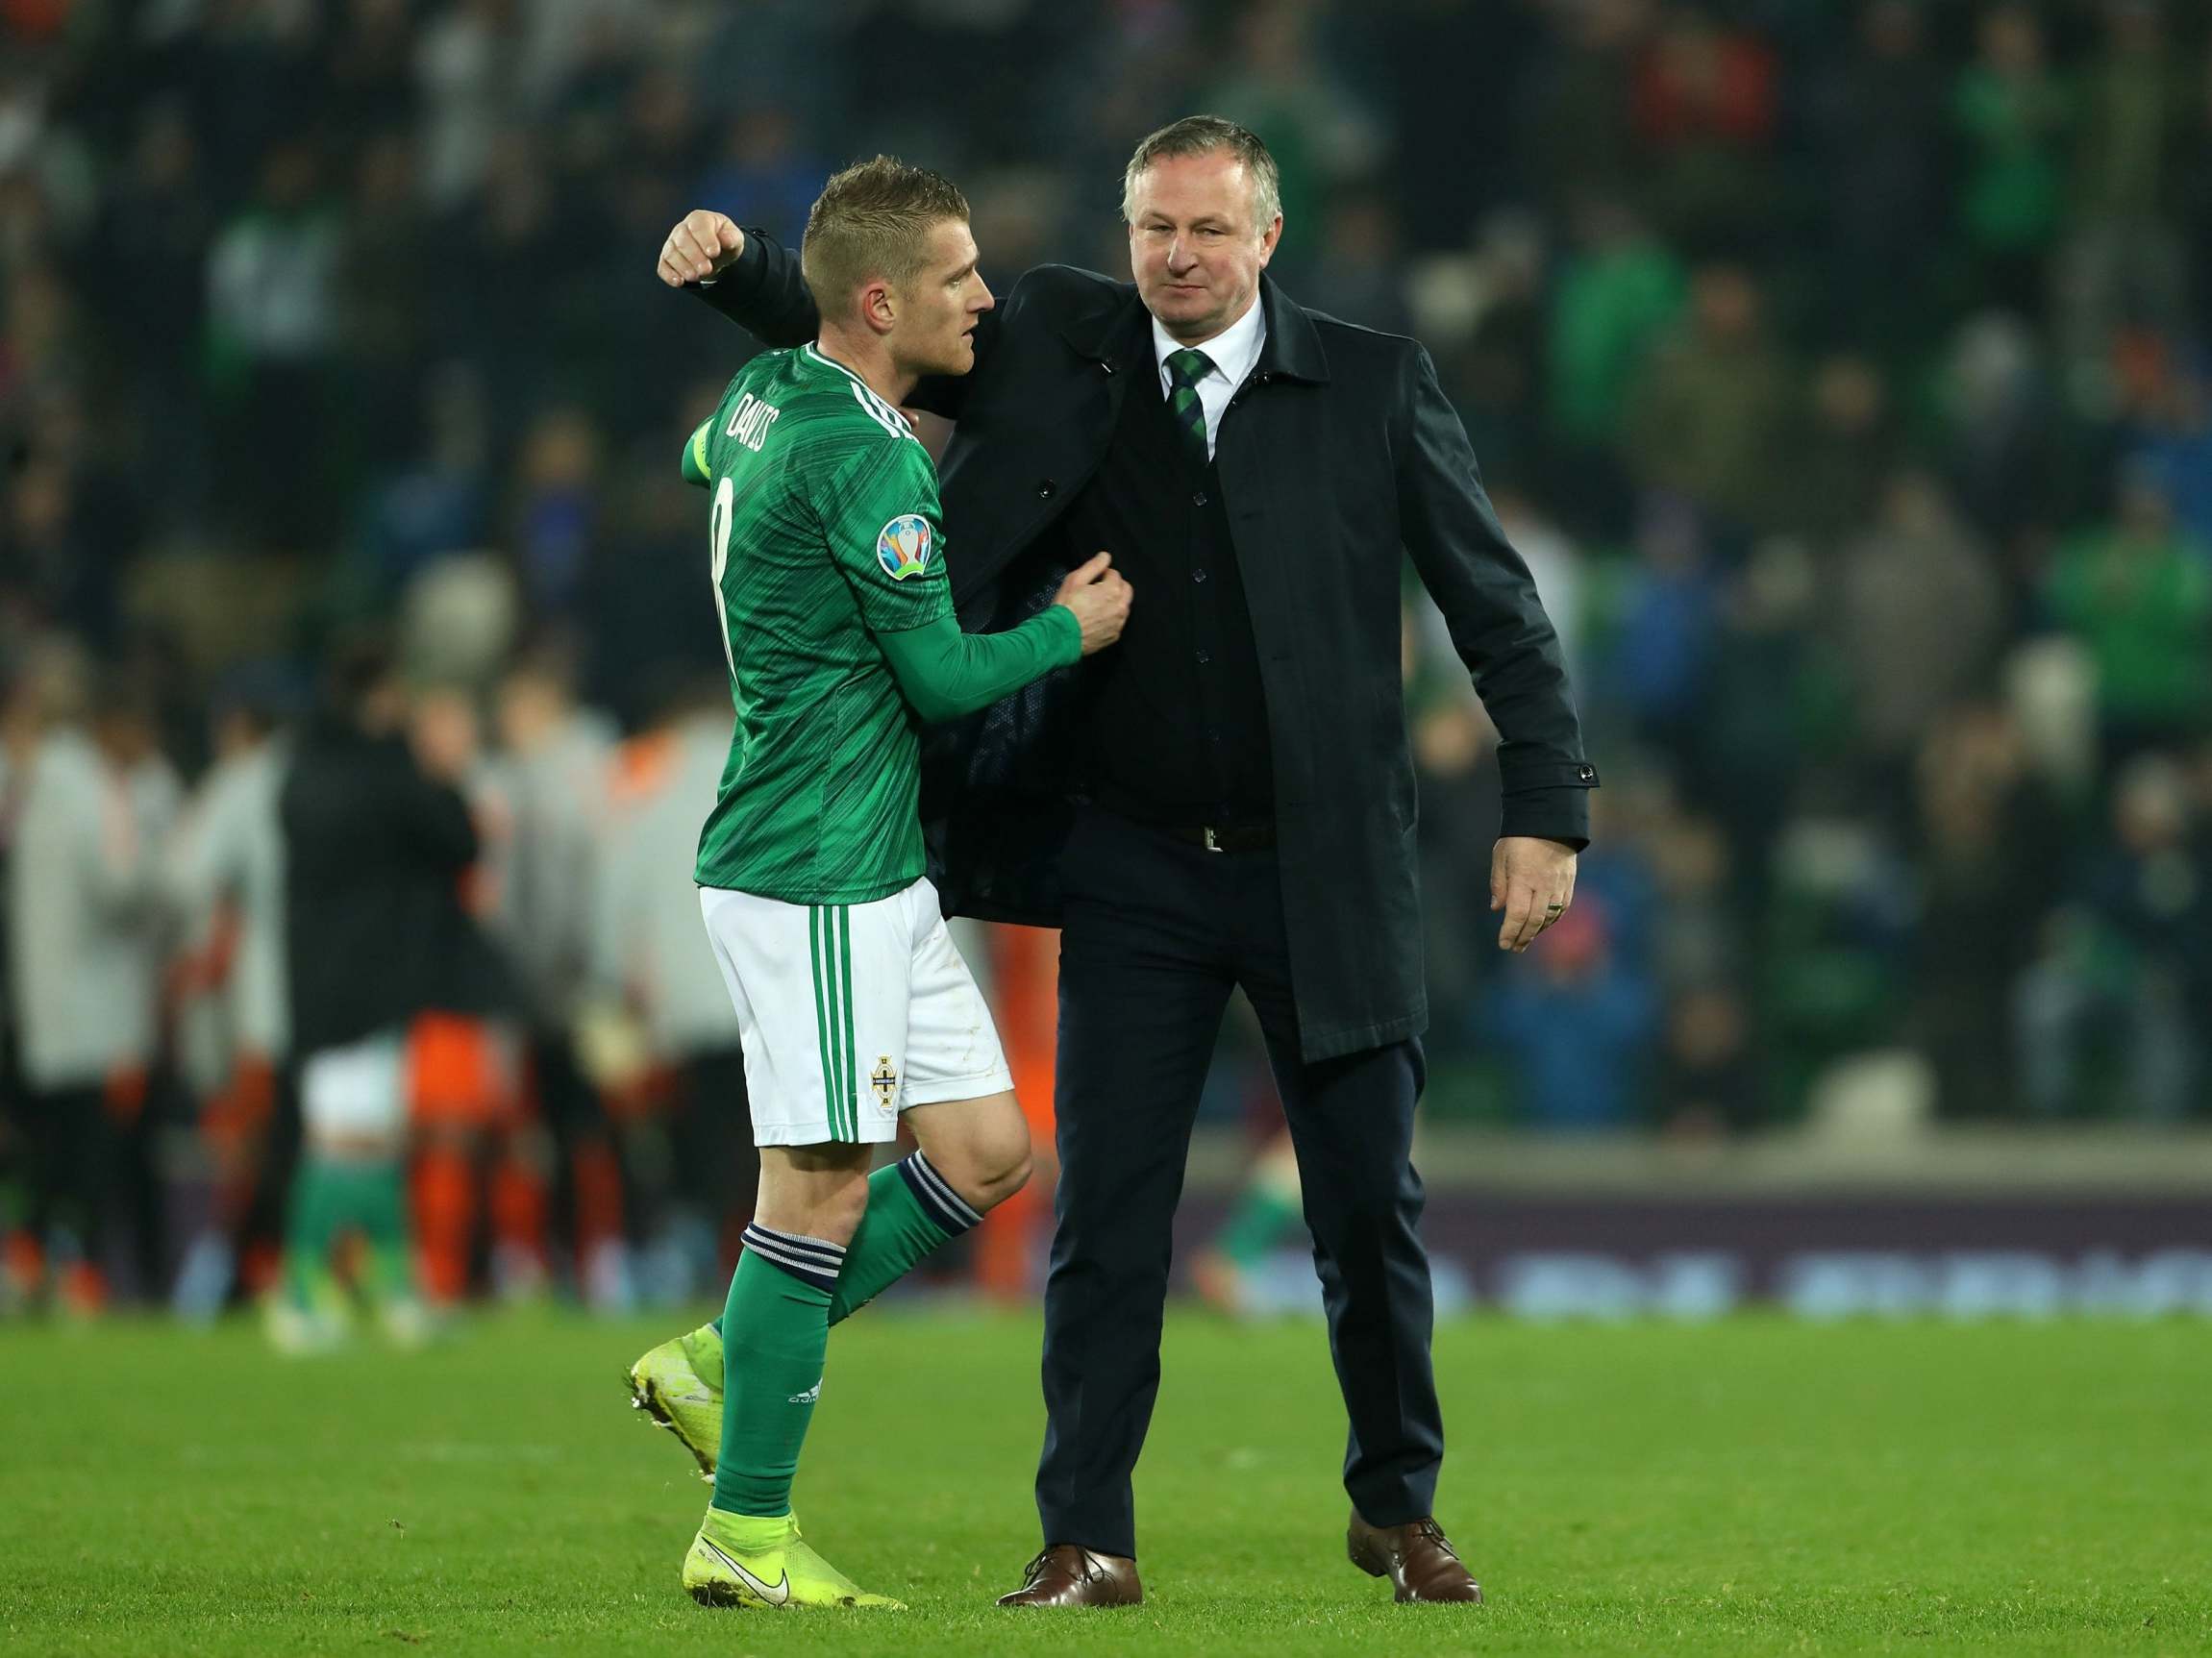 Euro 2020: How Northern Ireland could qualify having beaten only two teams in two years - The Independent